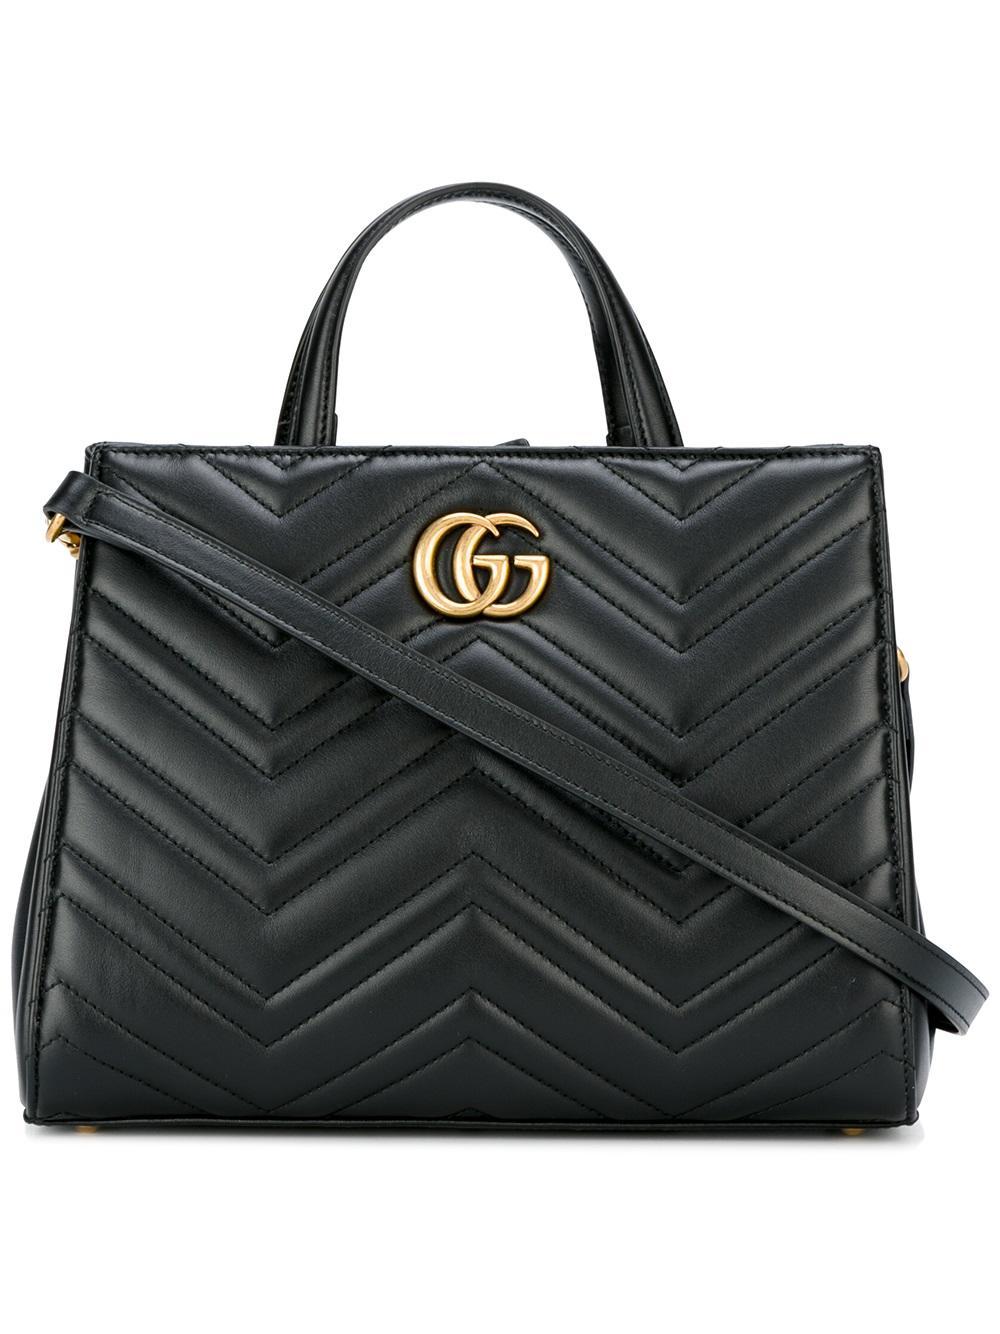 Lyst - Gucci GG Marmont Leather Tote Bag in Black